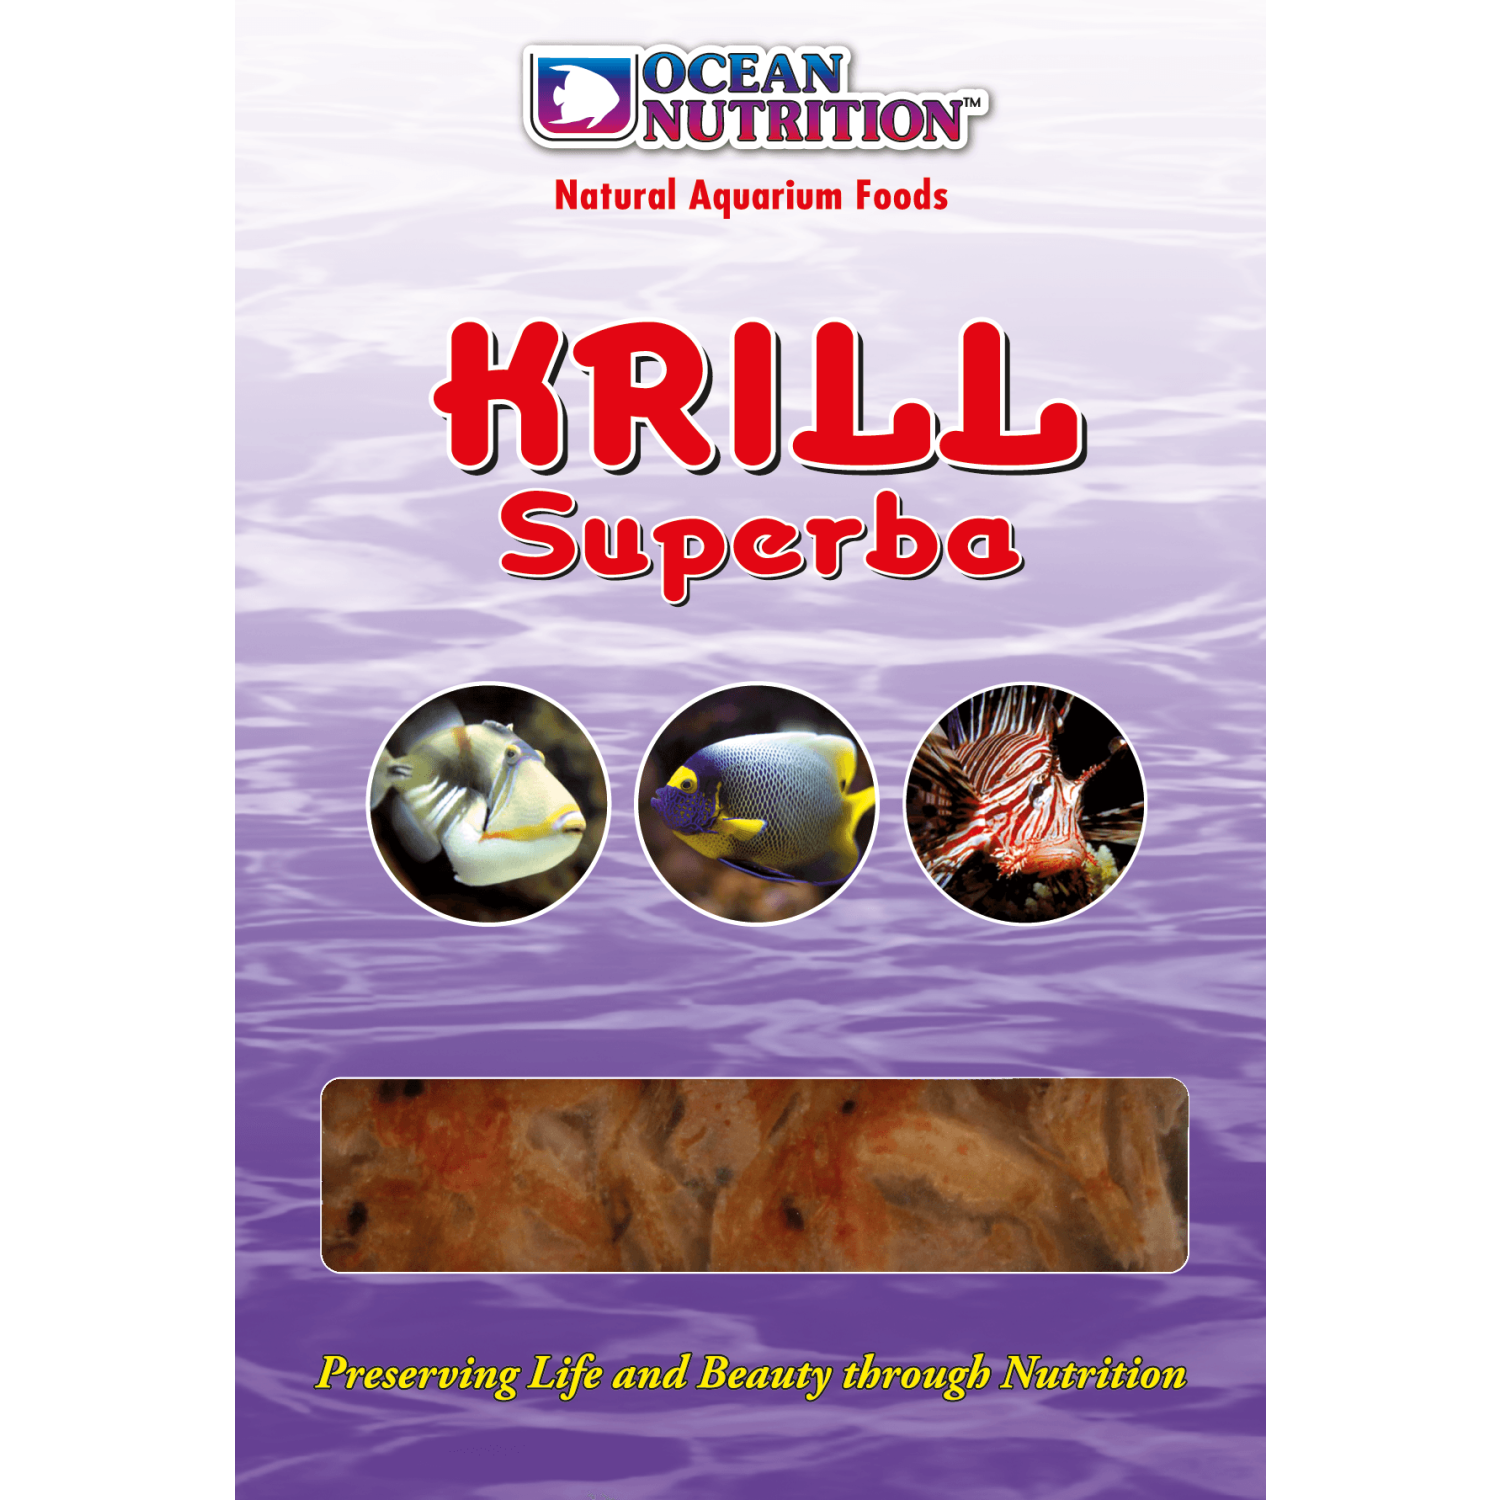 https://www.coralsands.de/media/image/product/977/lg/ocean-nutrition-whole-krill-superba.png